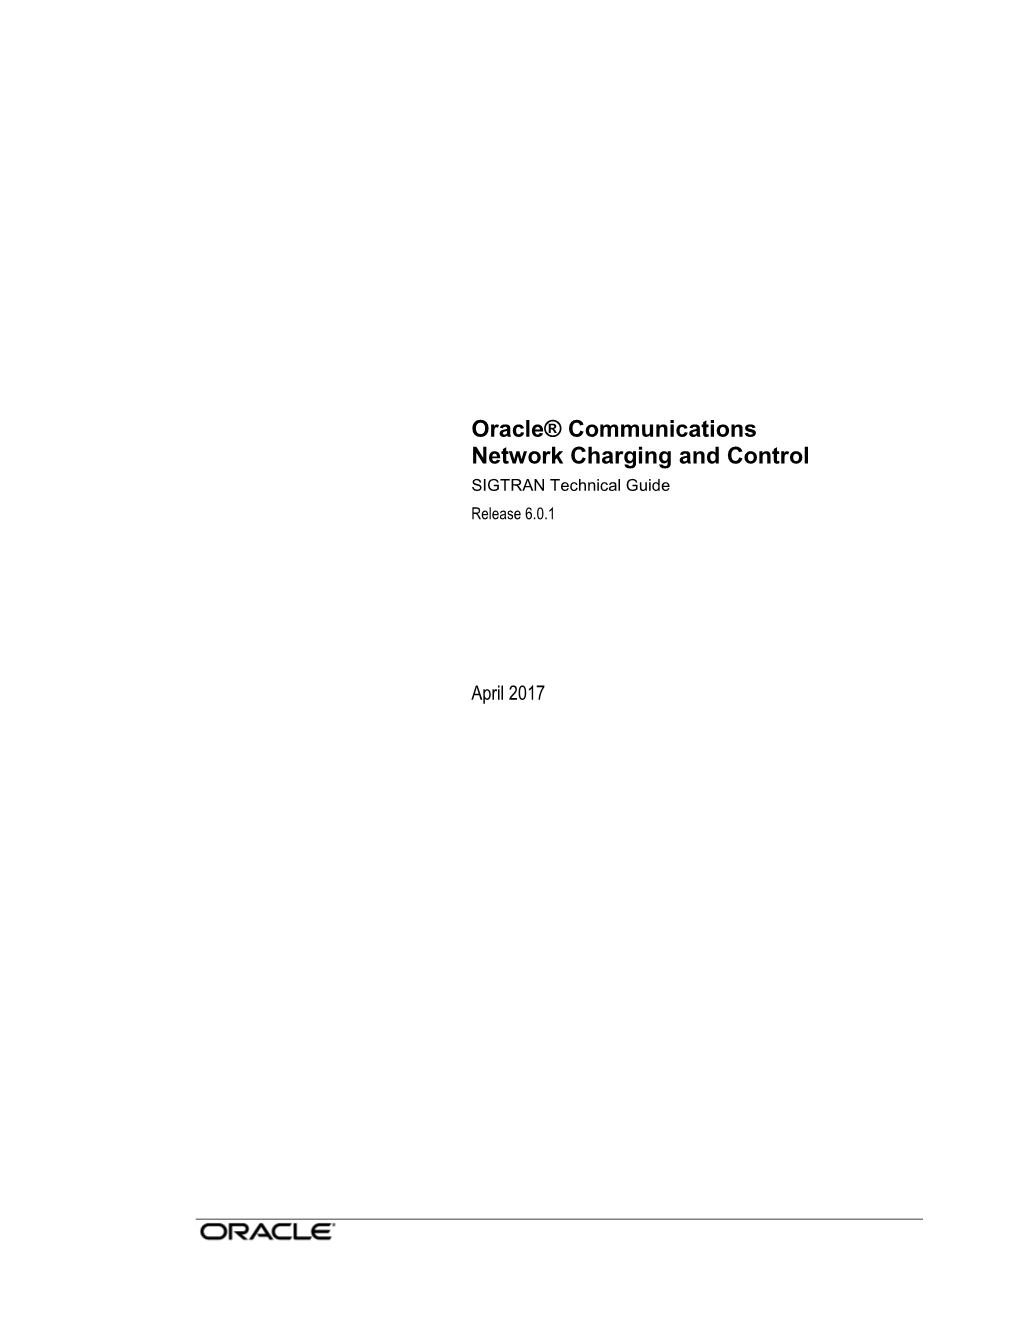 Oracle Communications Network Charging and Control SIGTRAN